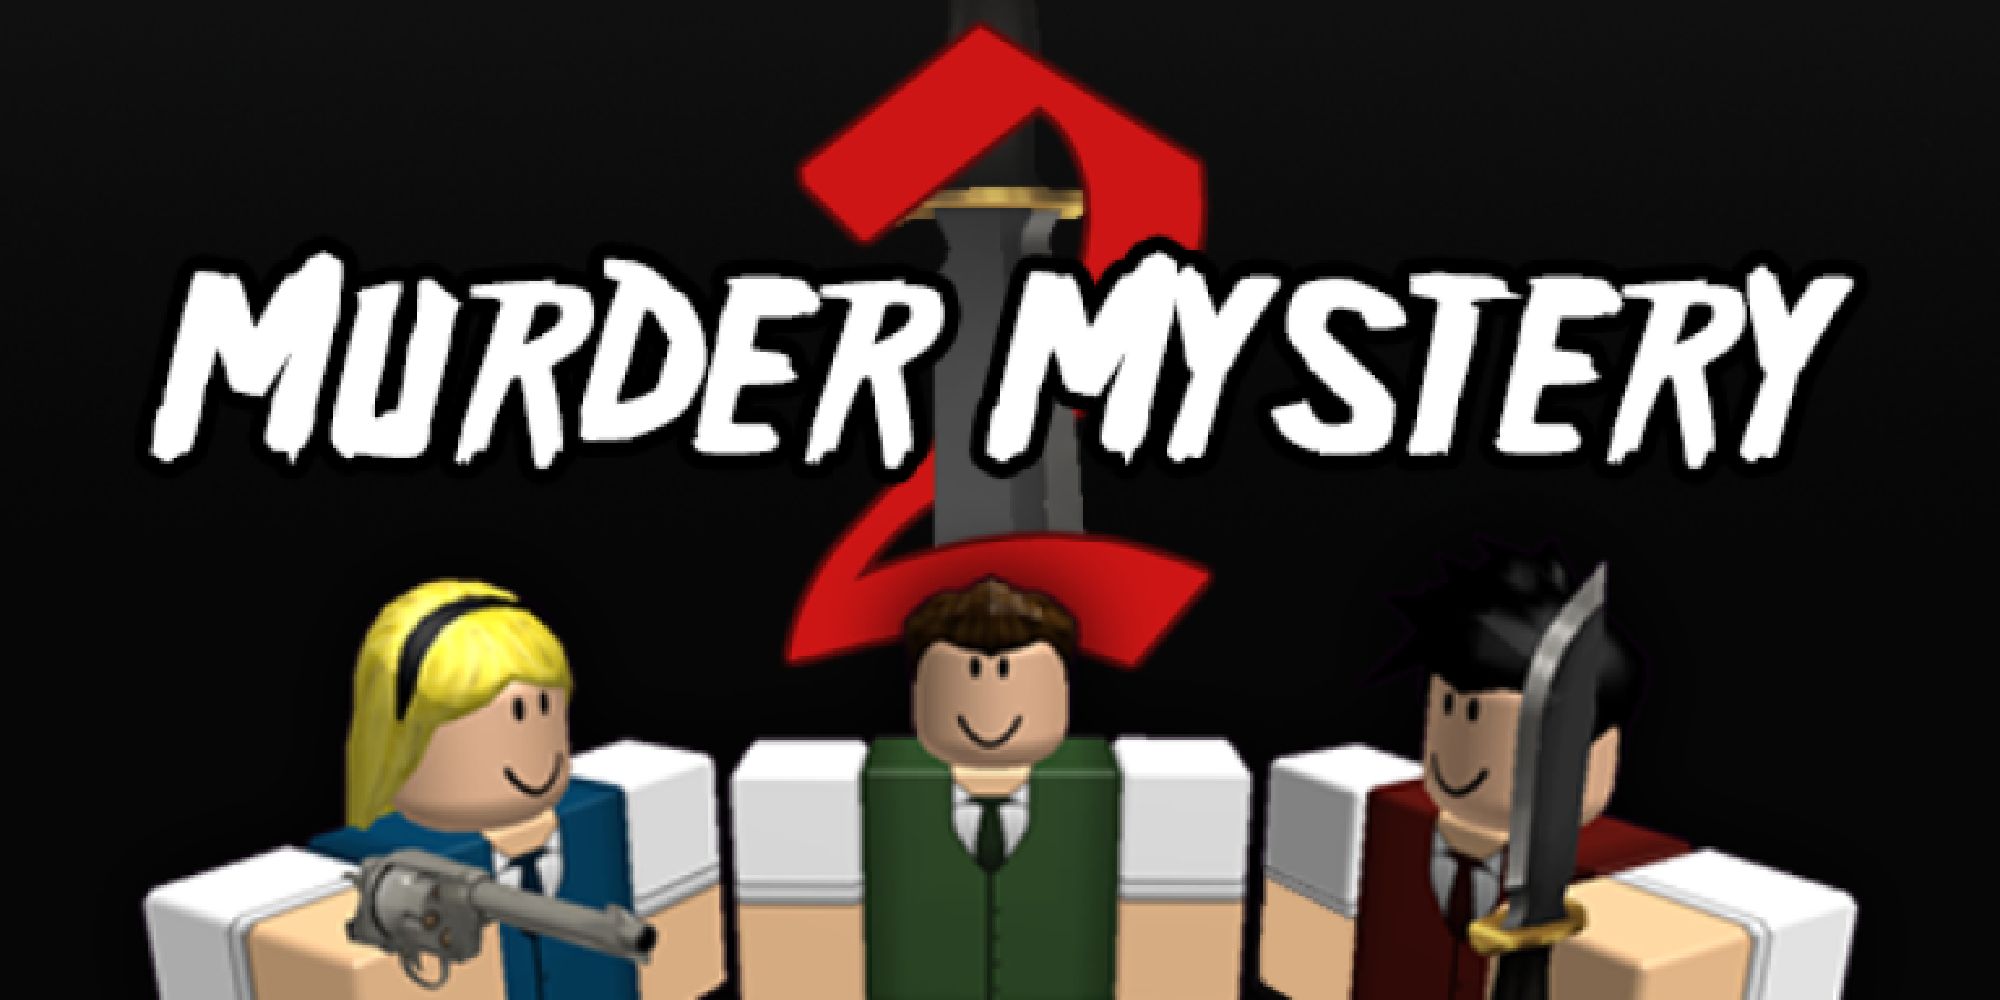 Promotional art for Murder Mystery 2 on Roblox.